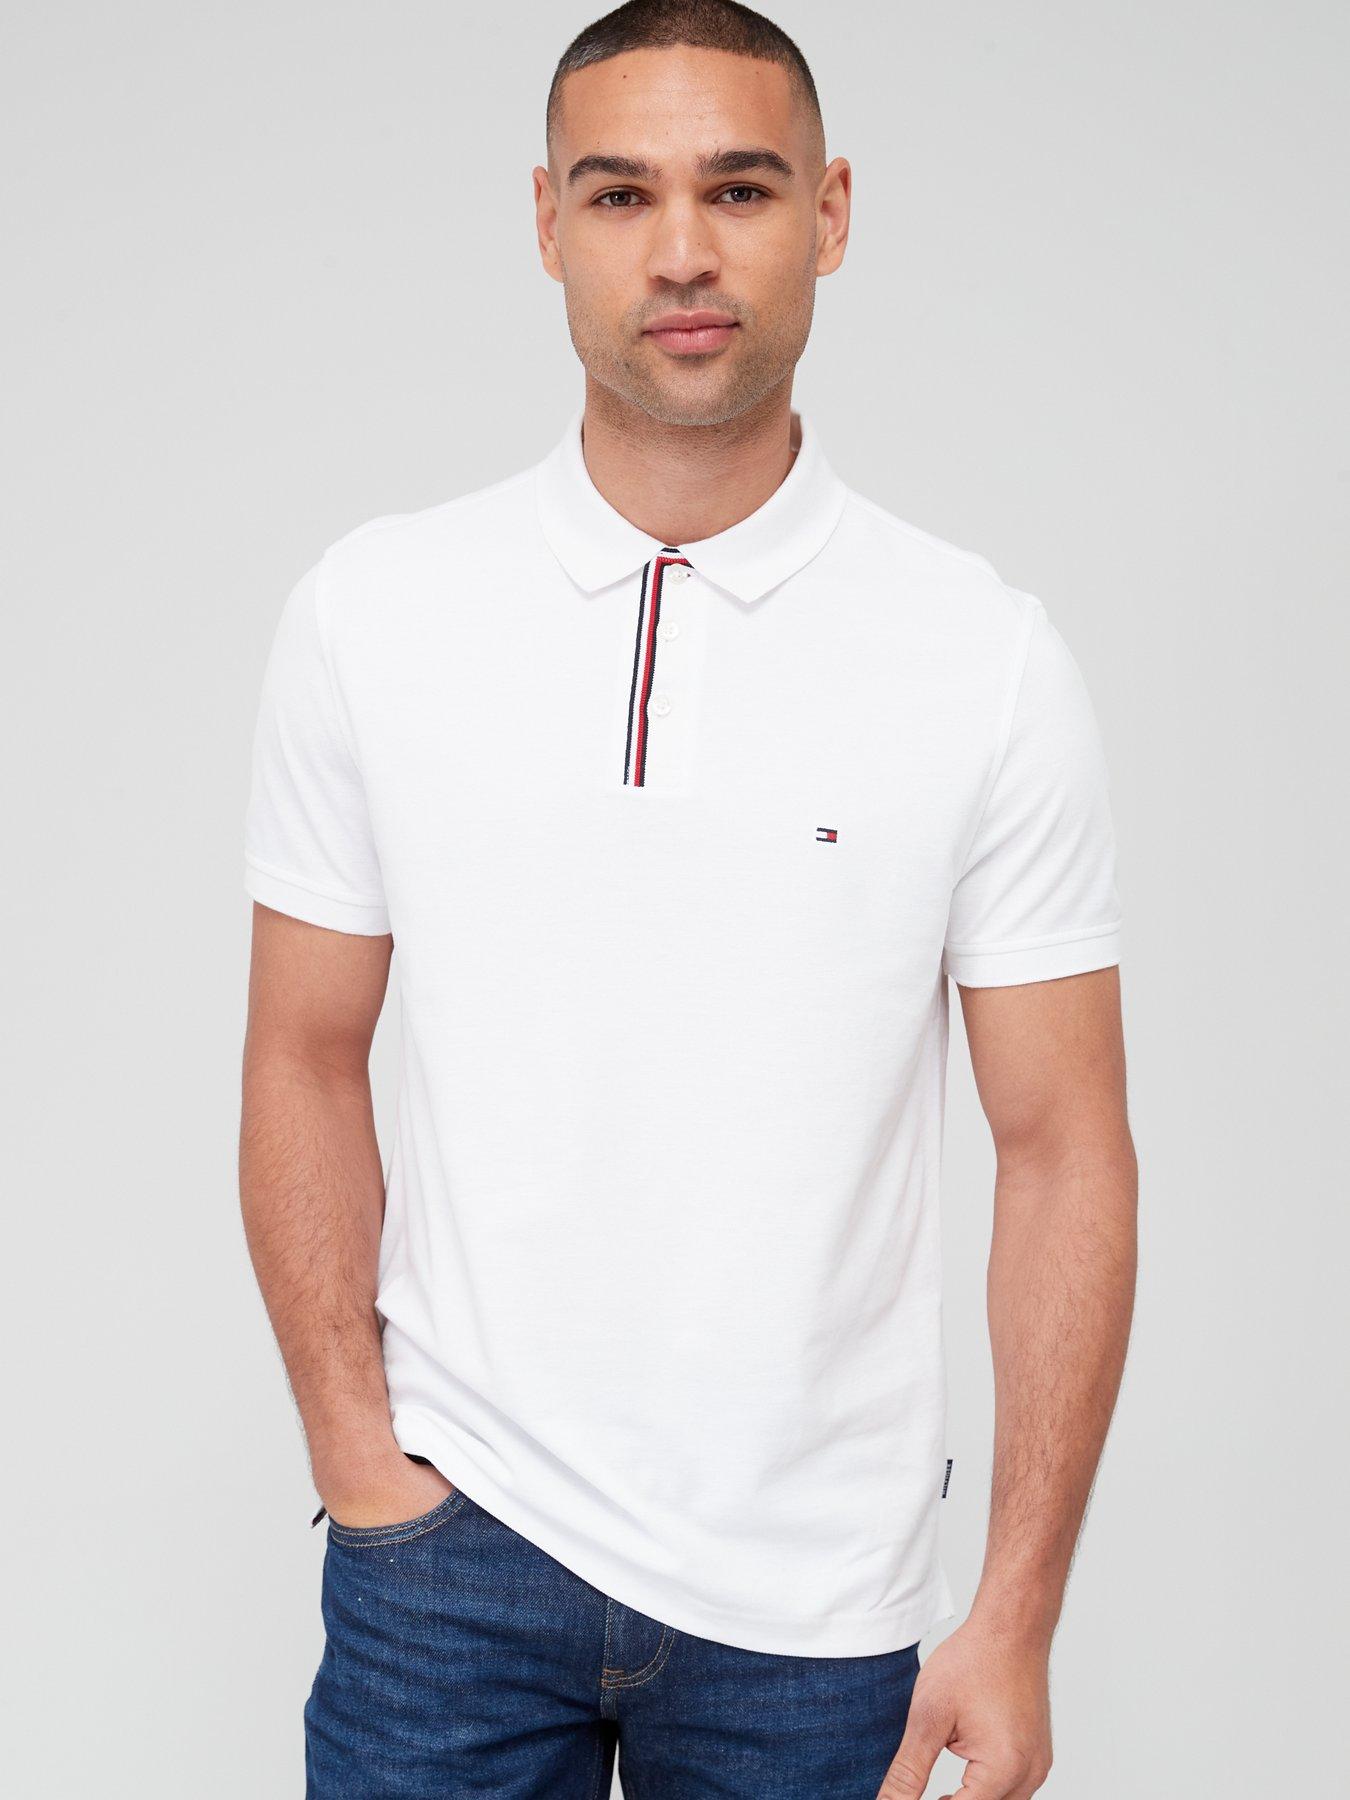 | Main T-shirts | Tommy Men & hilfiger Friday All | Black Sleeve Collection | Short | polos Deals